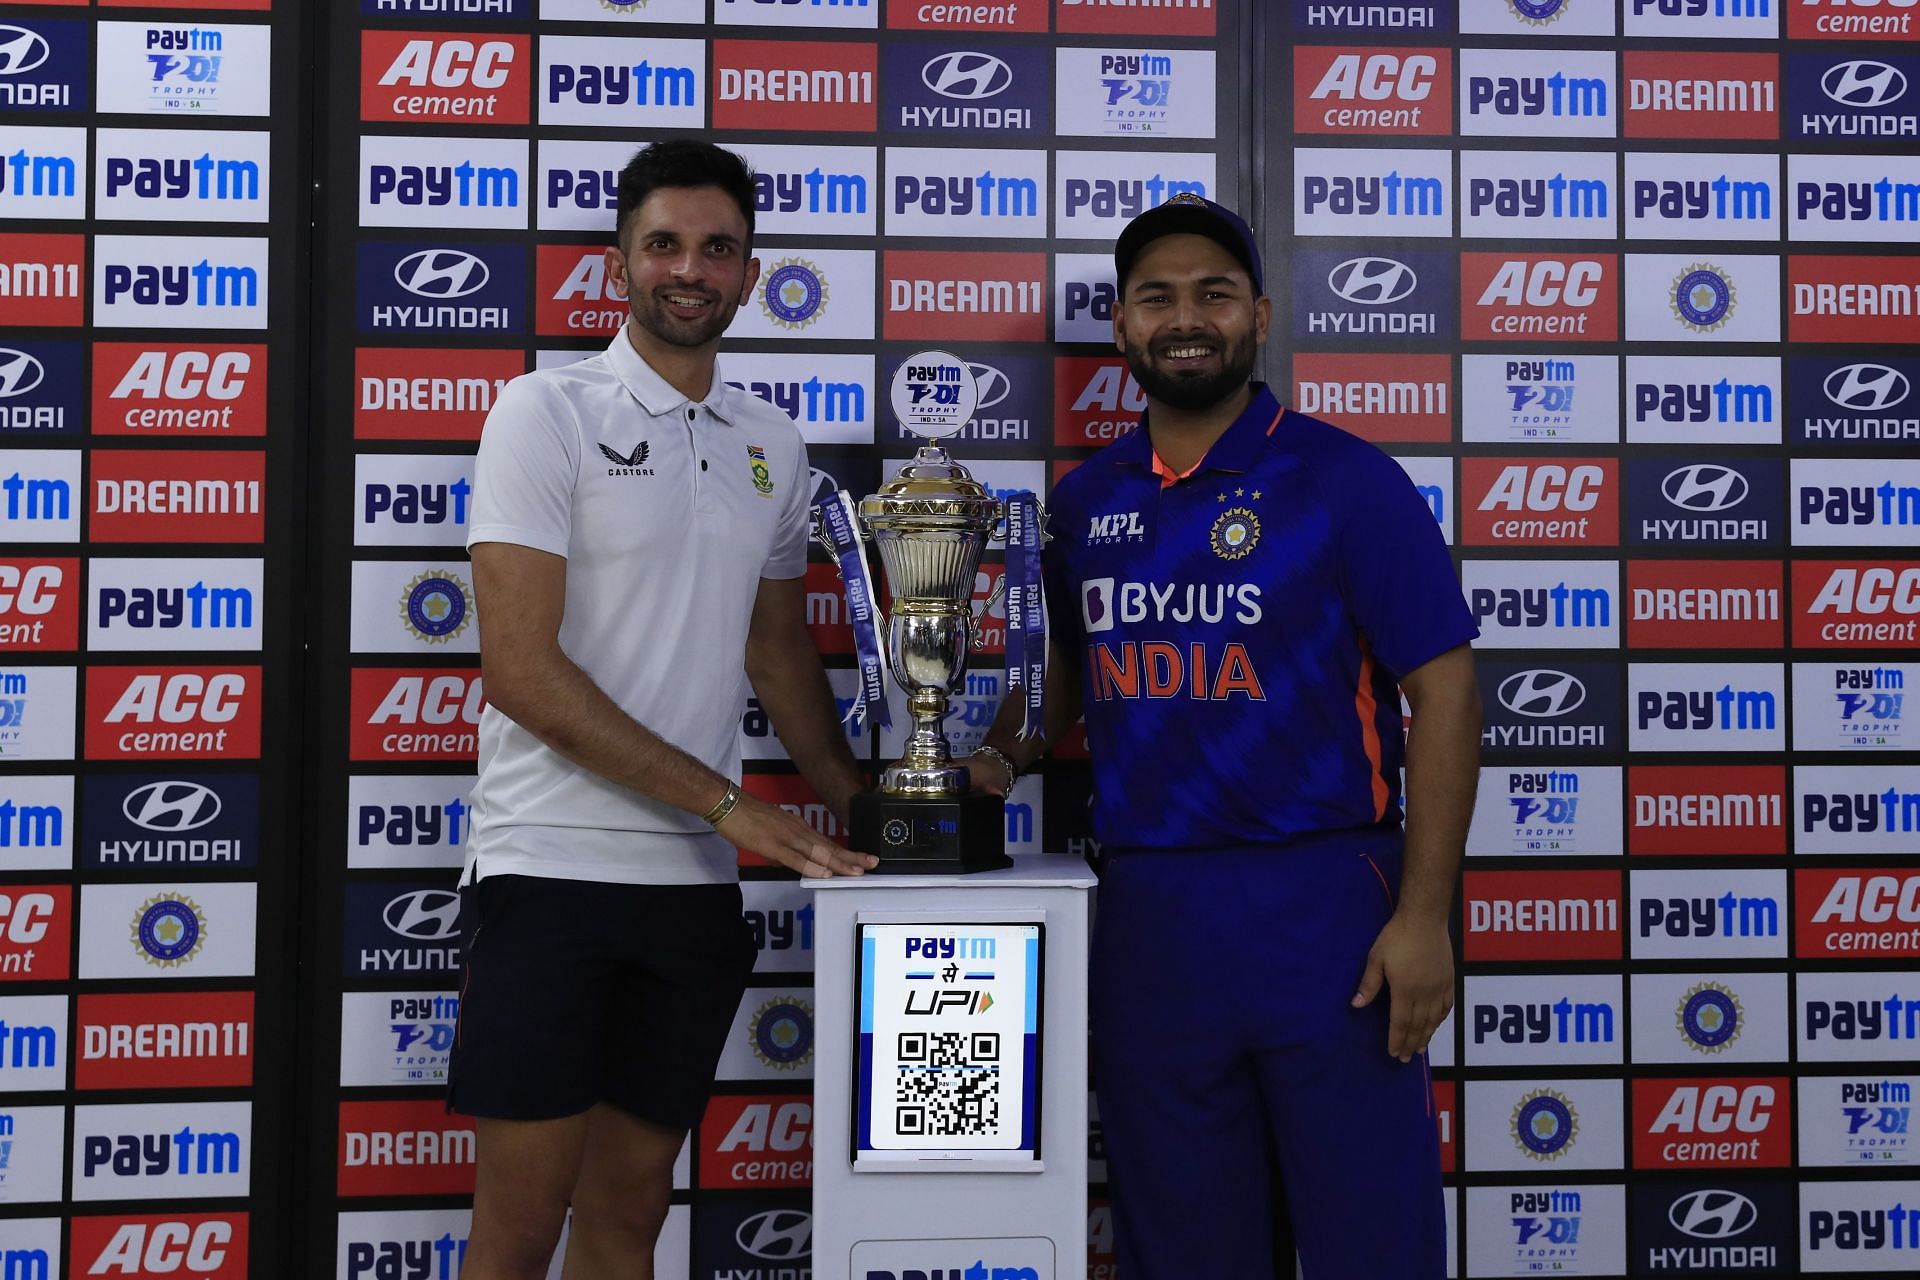 Rishabh Pant captained Team India in the home T20I series against South Africa